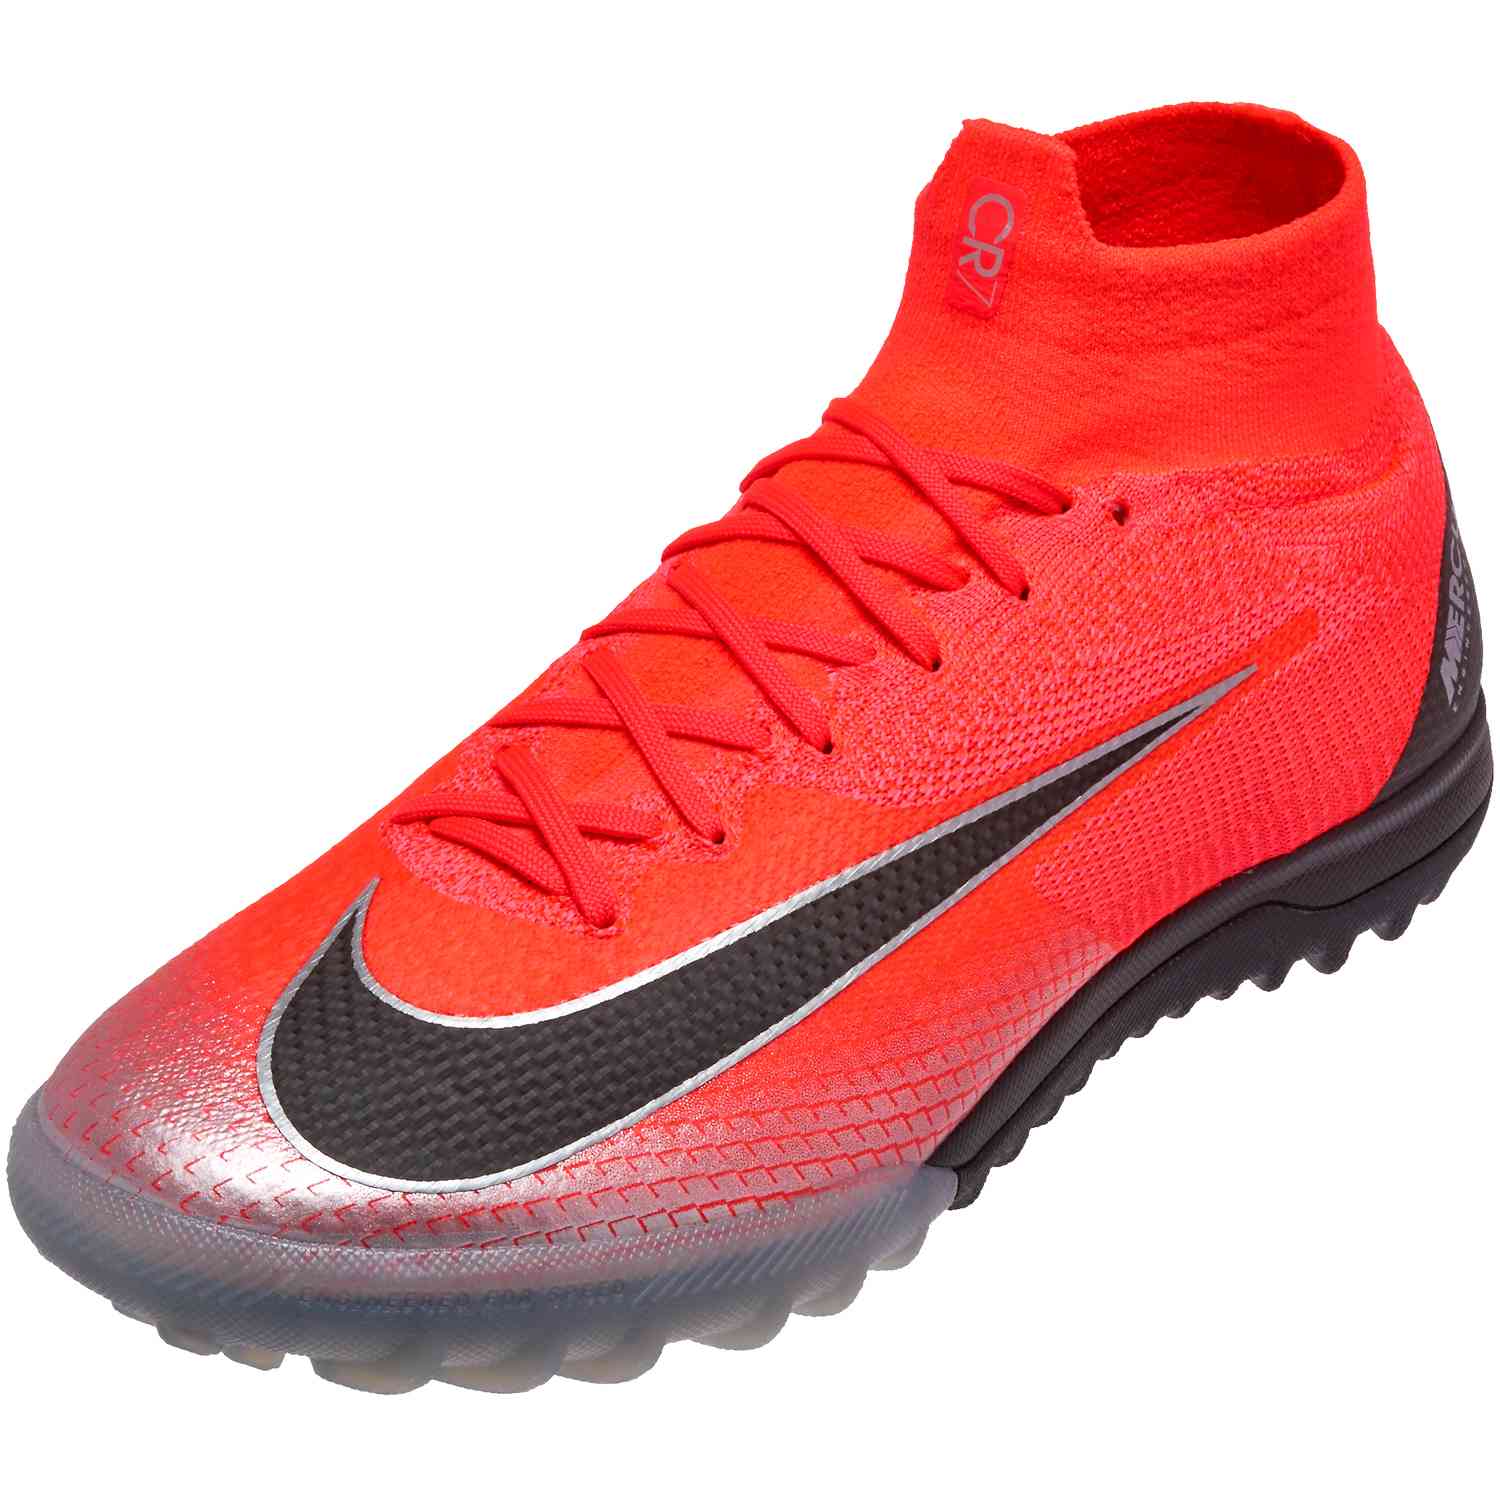 $ 269.99 Nike Mercurial SuperFly IV CR7 FG Soccer Cleats .